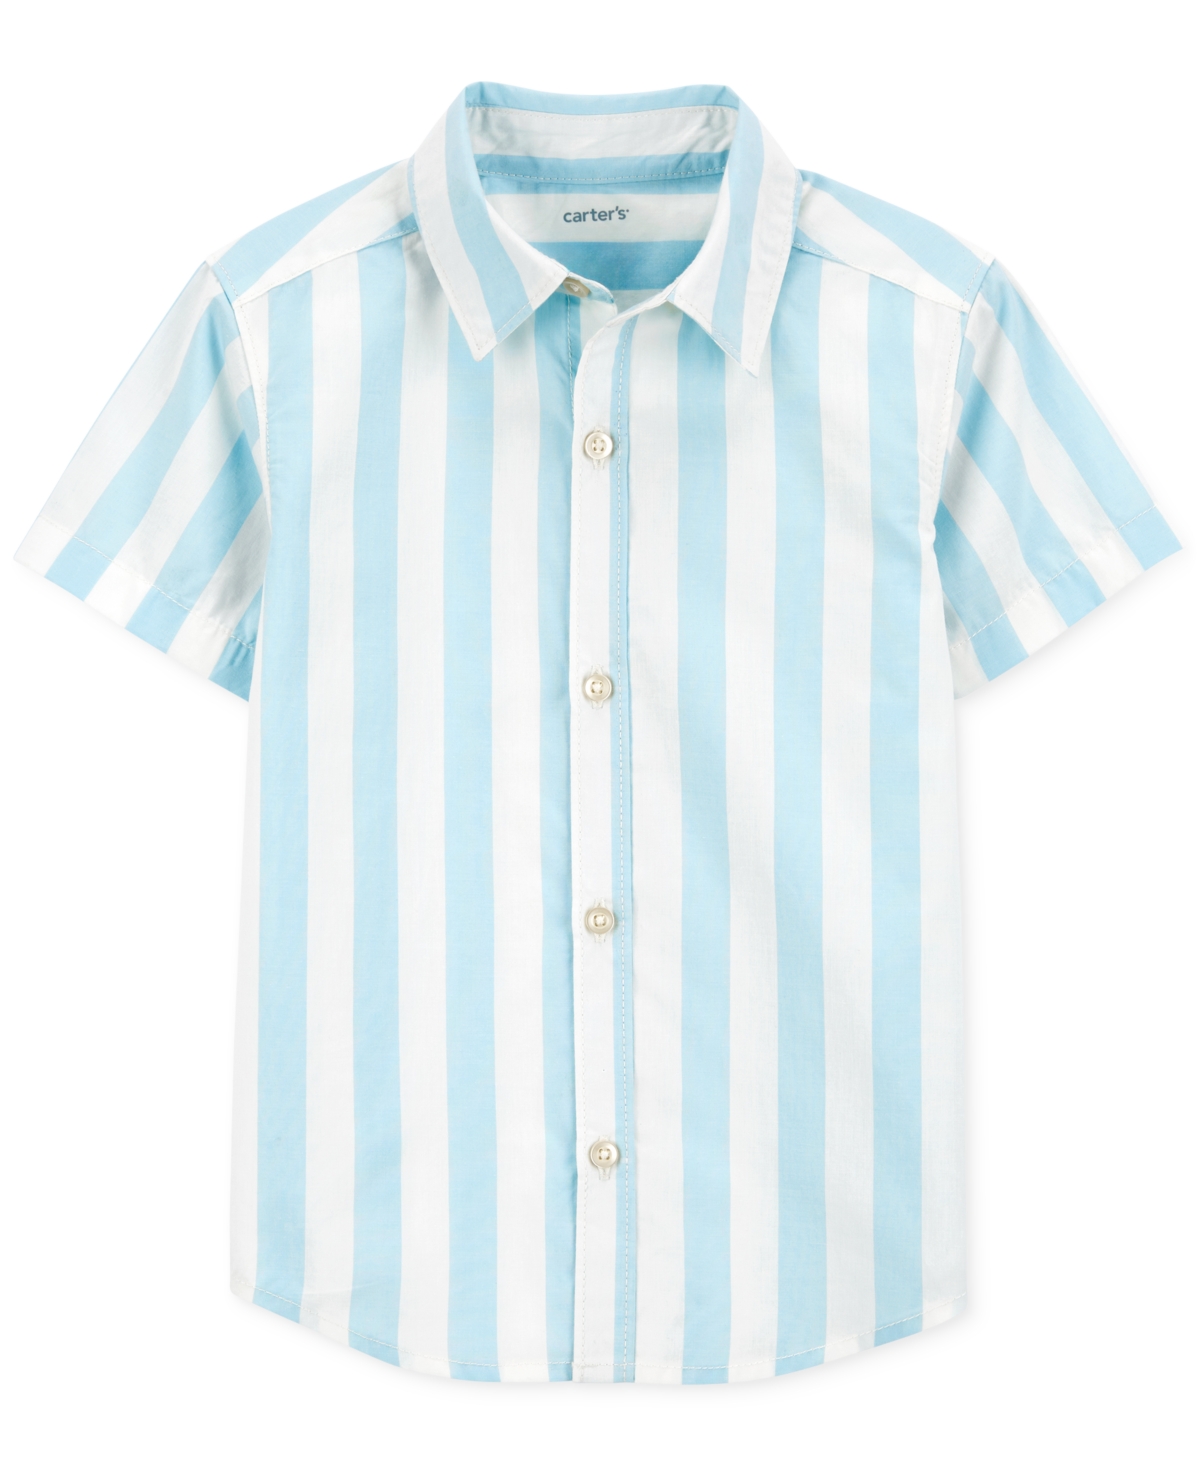 Carter's Babies' Toddler Boys Striped Button Down Shirt In Blue